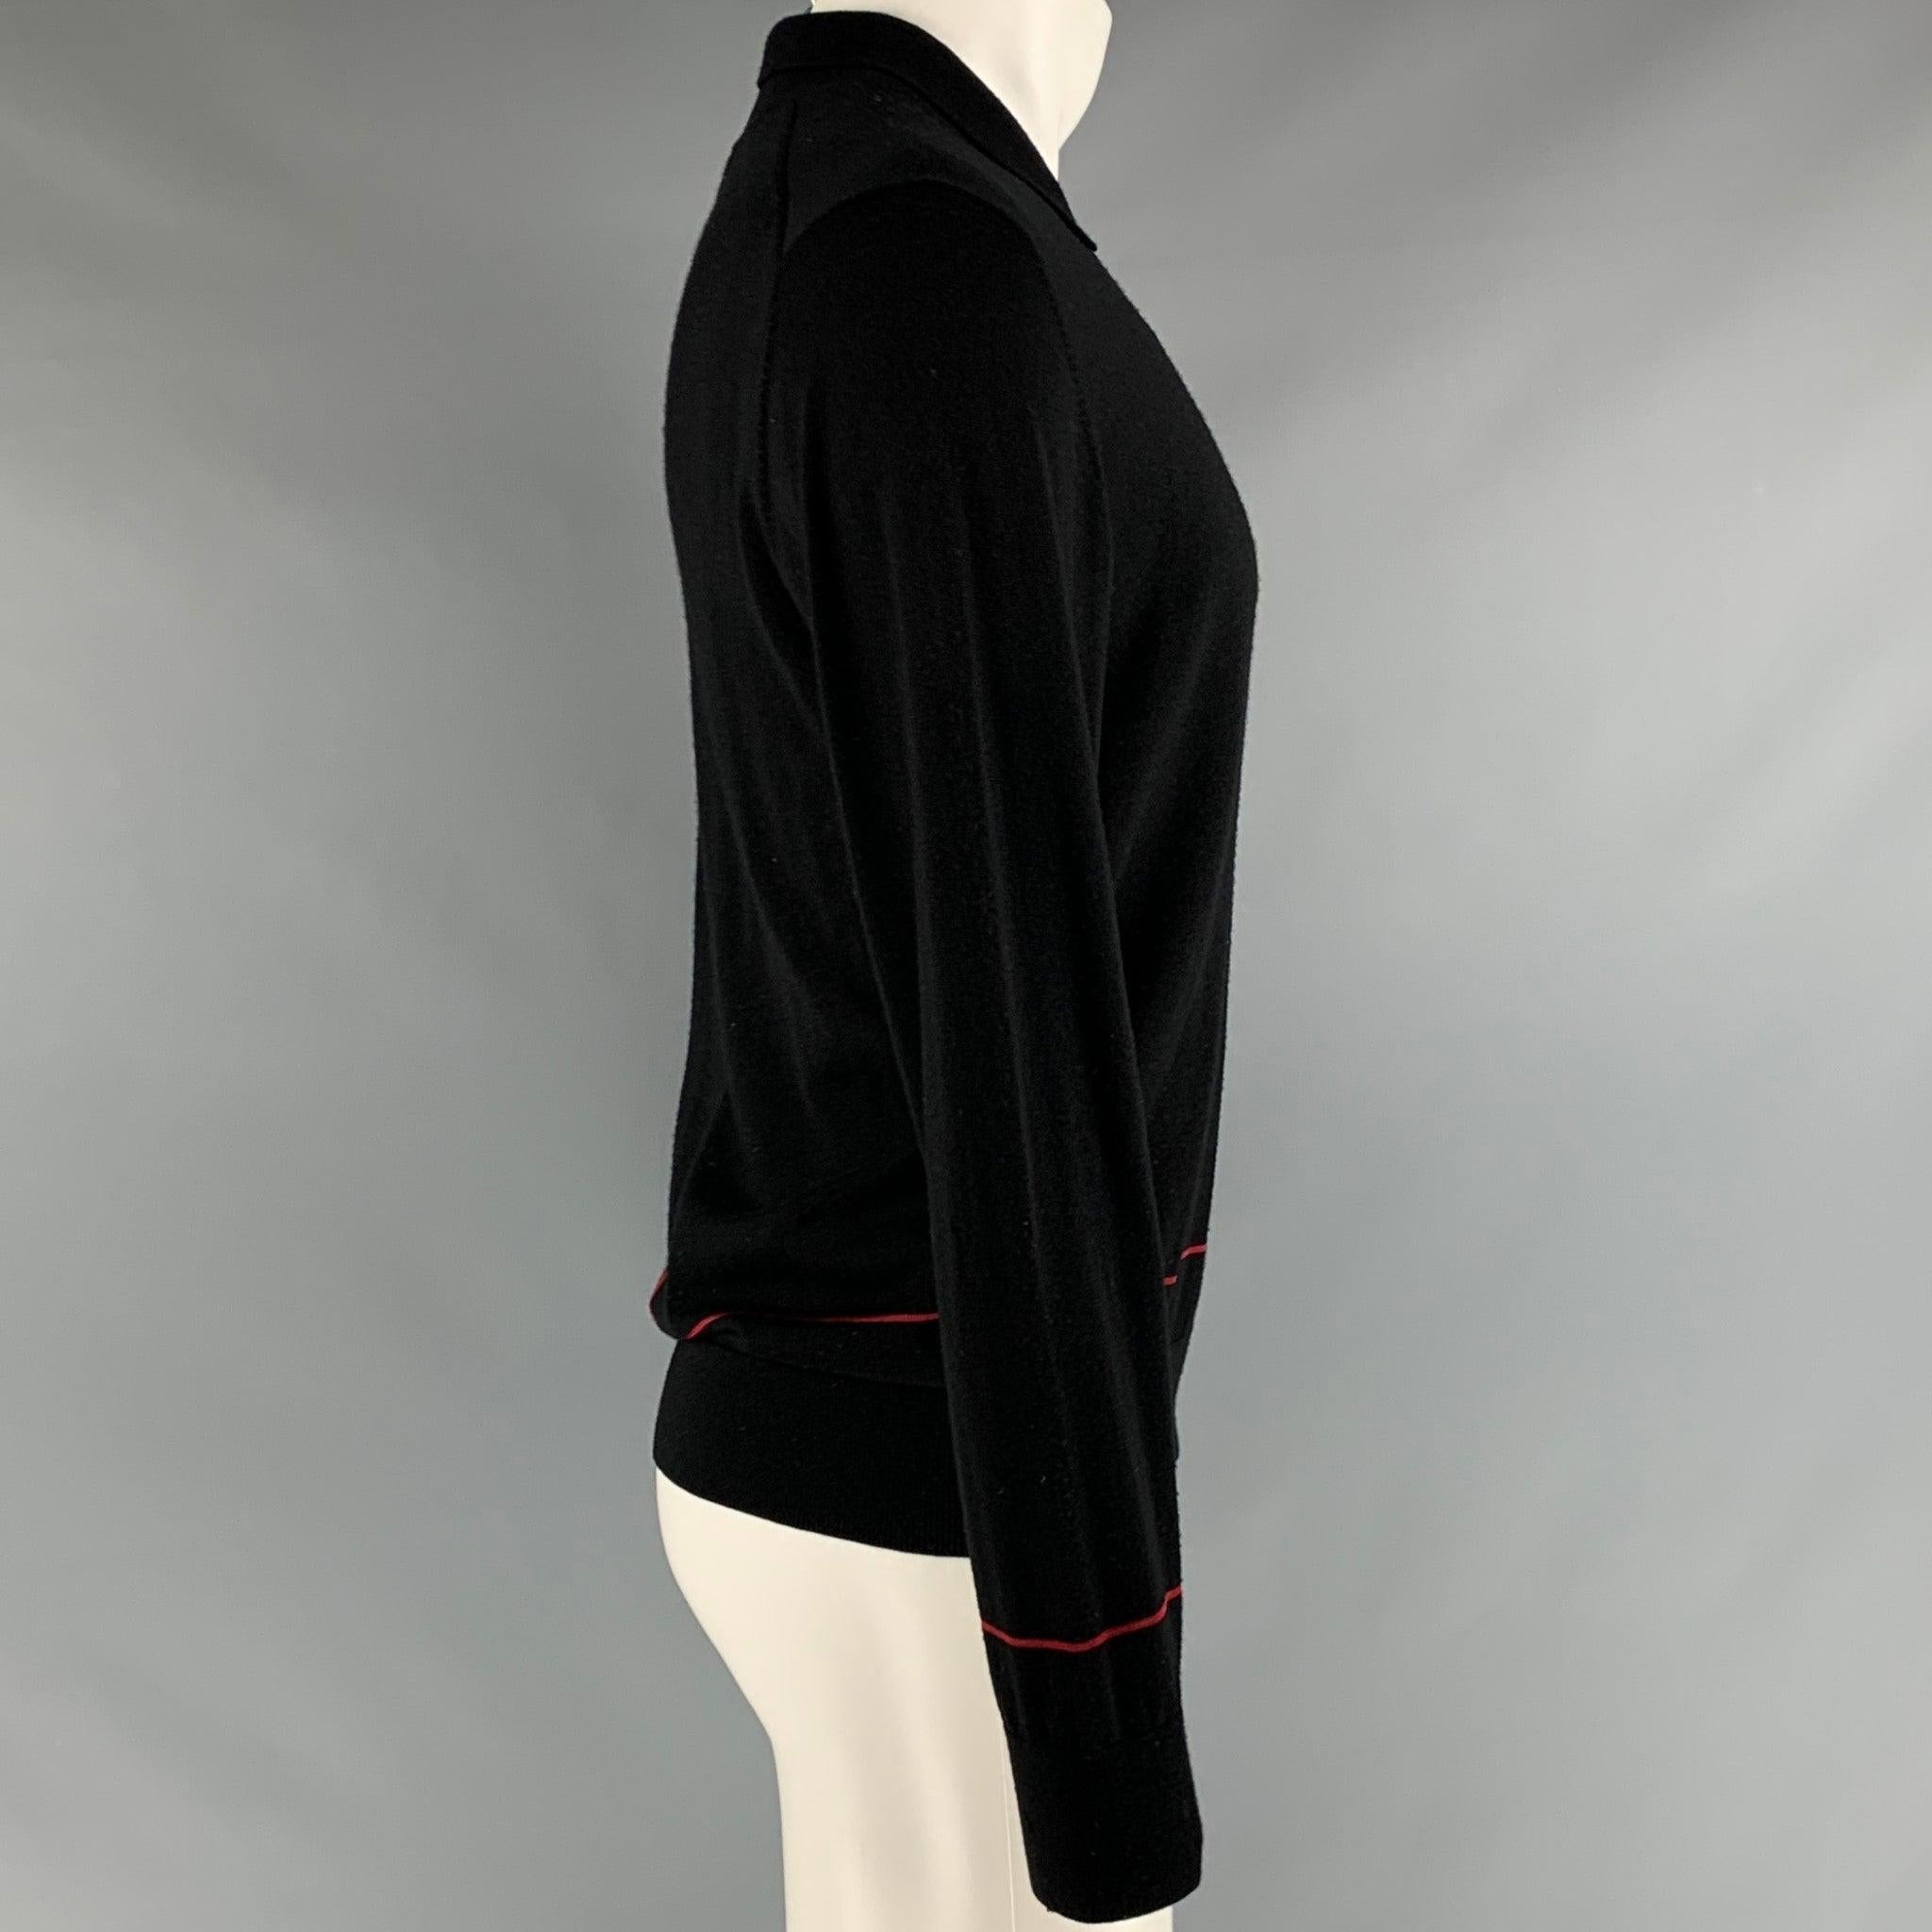 PS by PAUL SMITH pullover in a black merino wool featuring red stripe detail, spread collar, and half placket button closure.Good Pre-Owned Condition. Moderate signs of wear, please check photos. As is. 

Marked:   S 

Measurements: 
 
Shoulder: 18